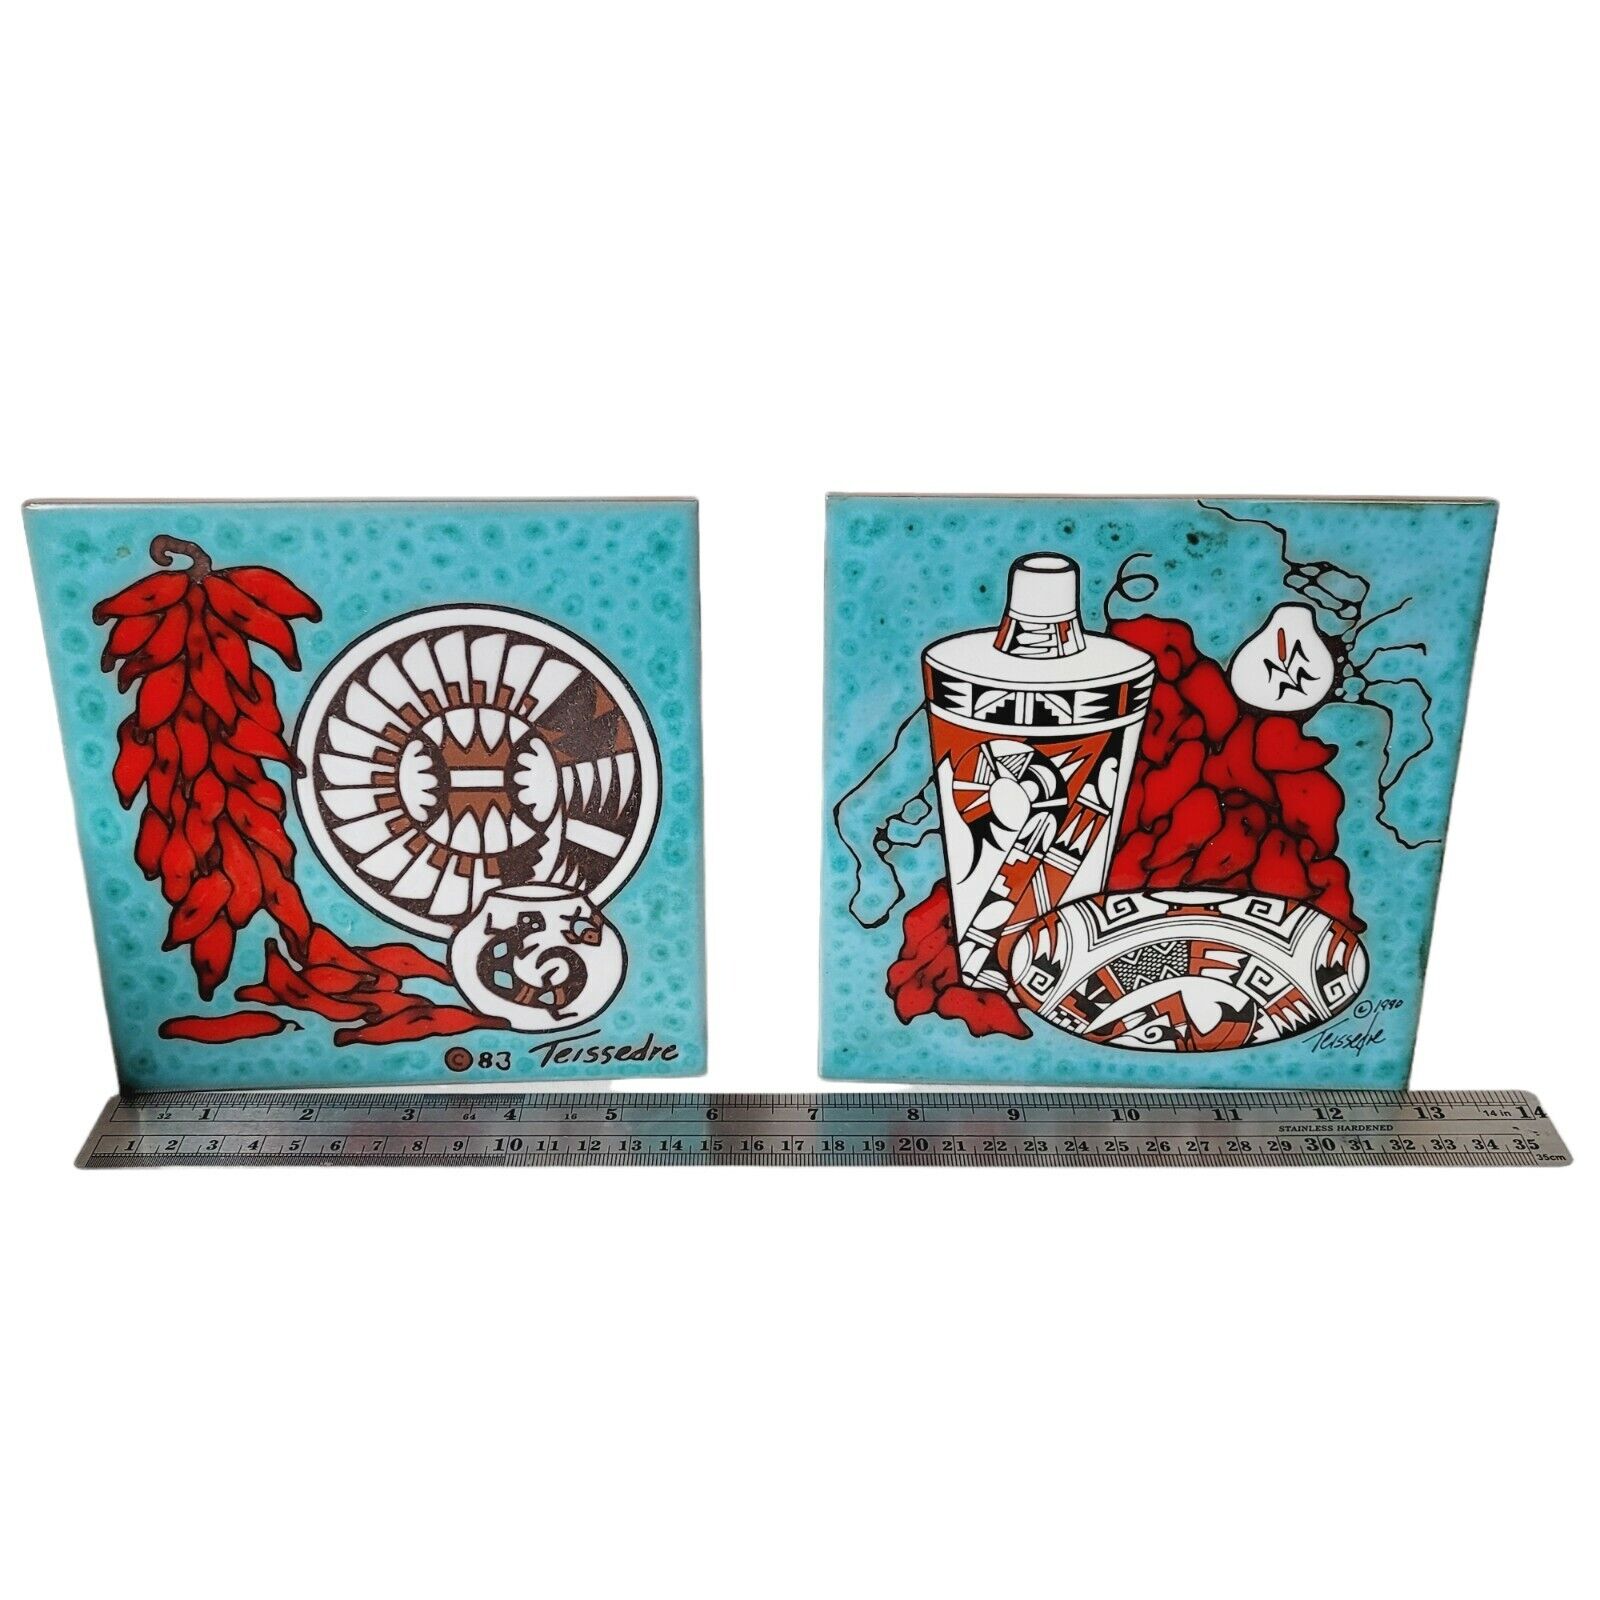 2 Cleo Teissedre Southwest Teal Red Hand Painted Art Tile Trivet Coaster ‘83 ‘90 Cleo Teissedre - фотография #6